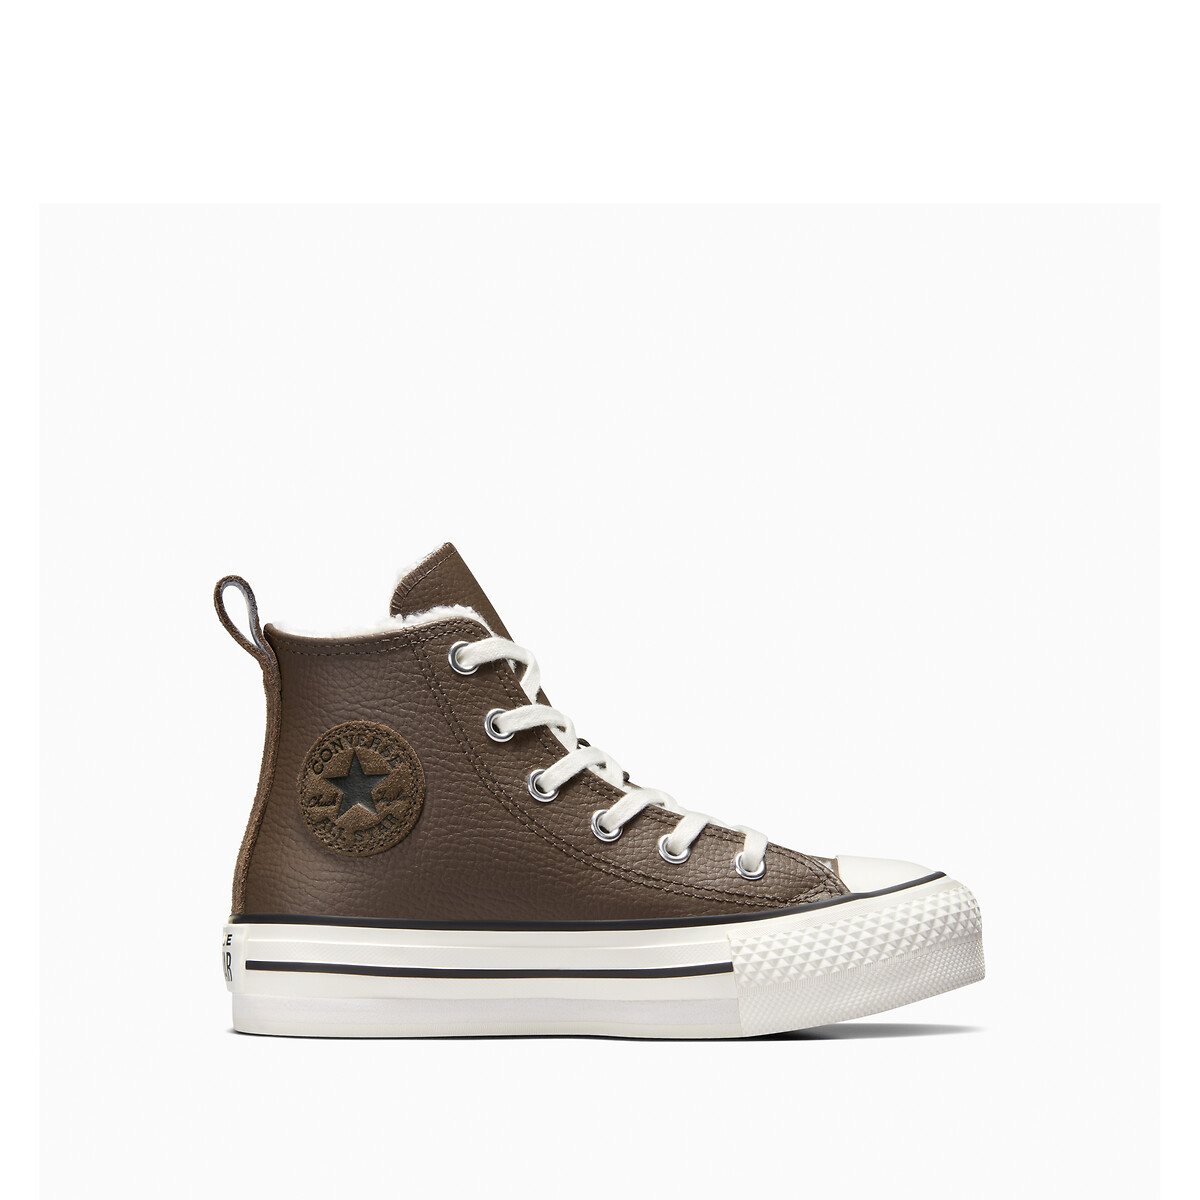 Image of Kids All Star Eva Lift Warm Winter Leather High Top Trainers